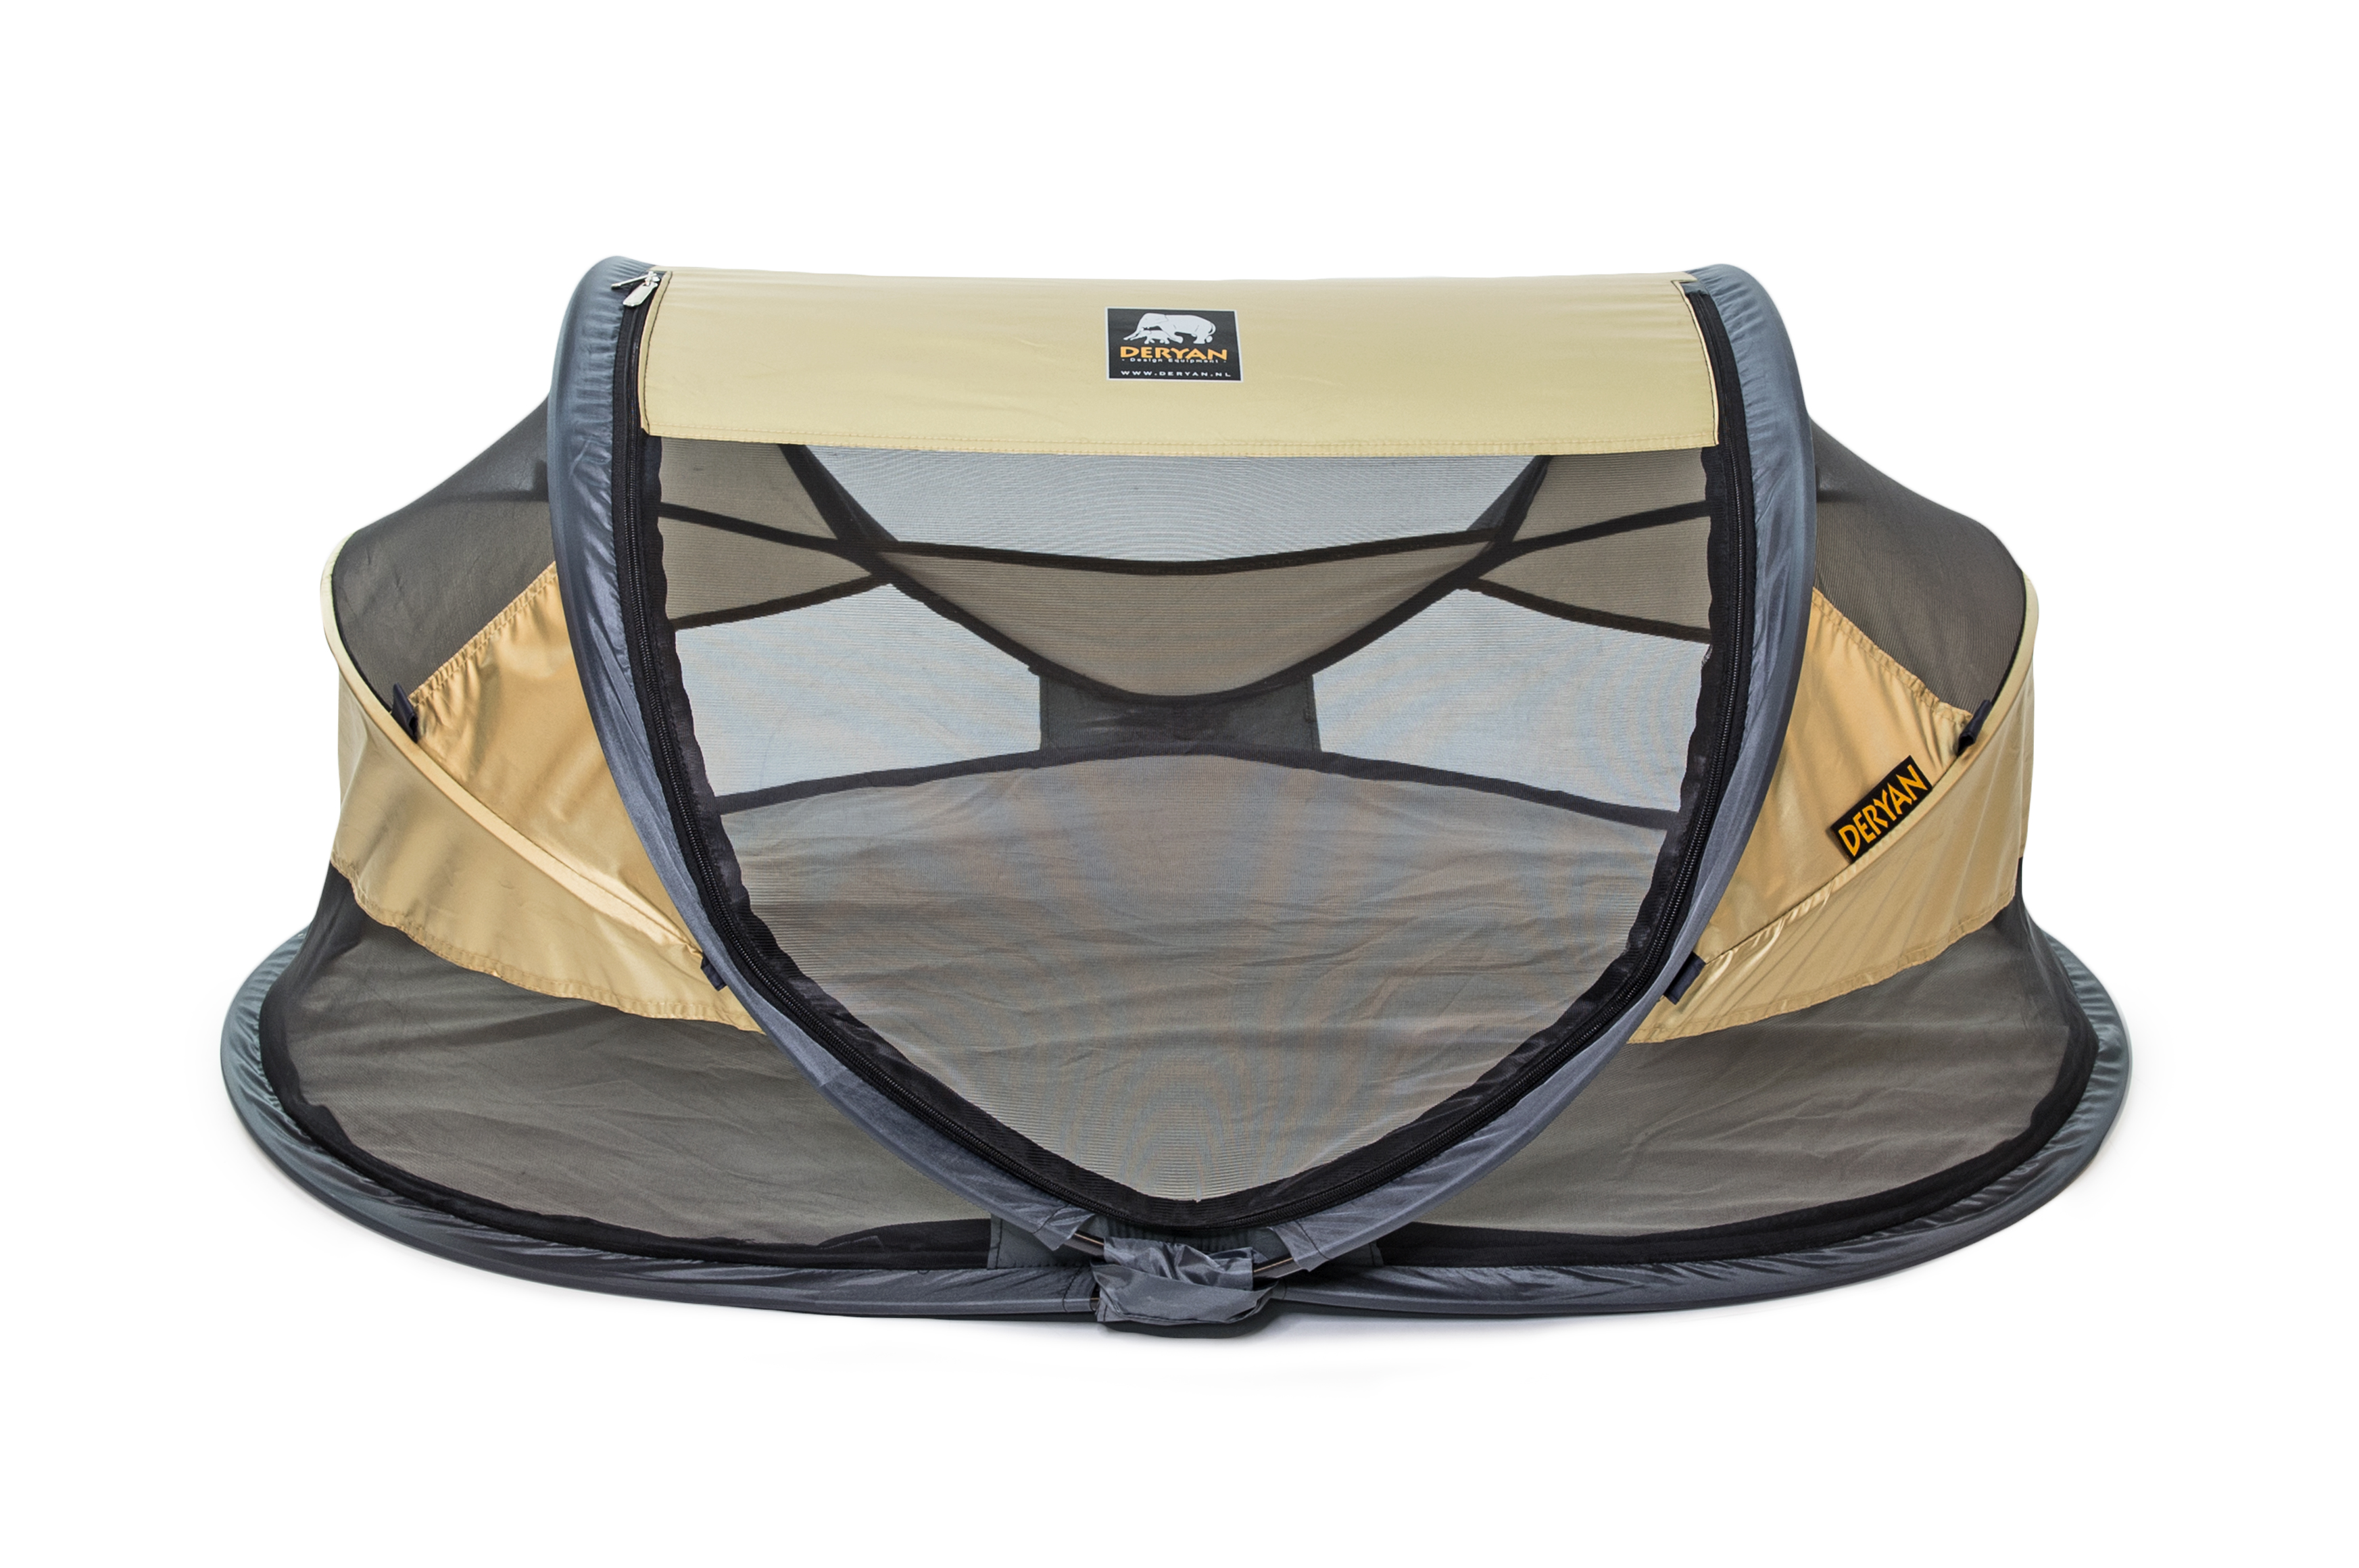 Deryan Travel Cot Baby Luxe Gold Travel Cot Baby Luxe Gold gold